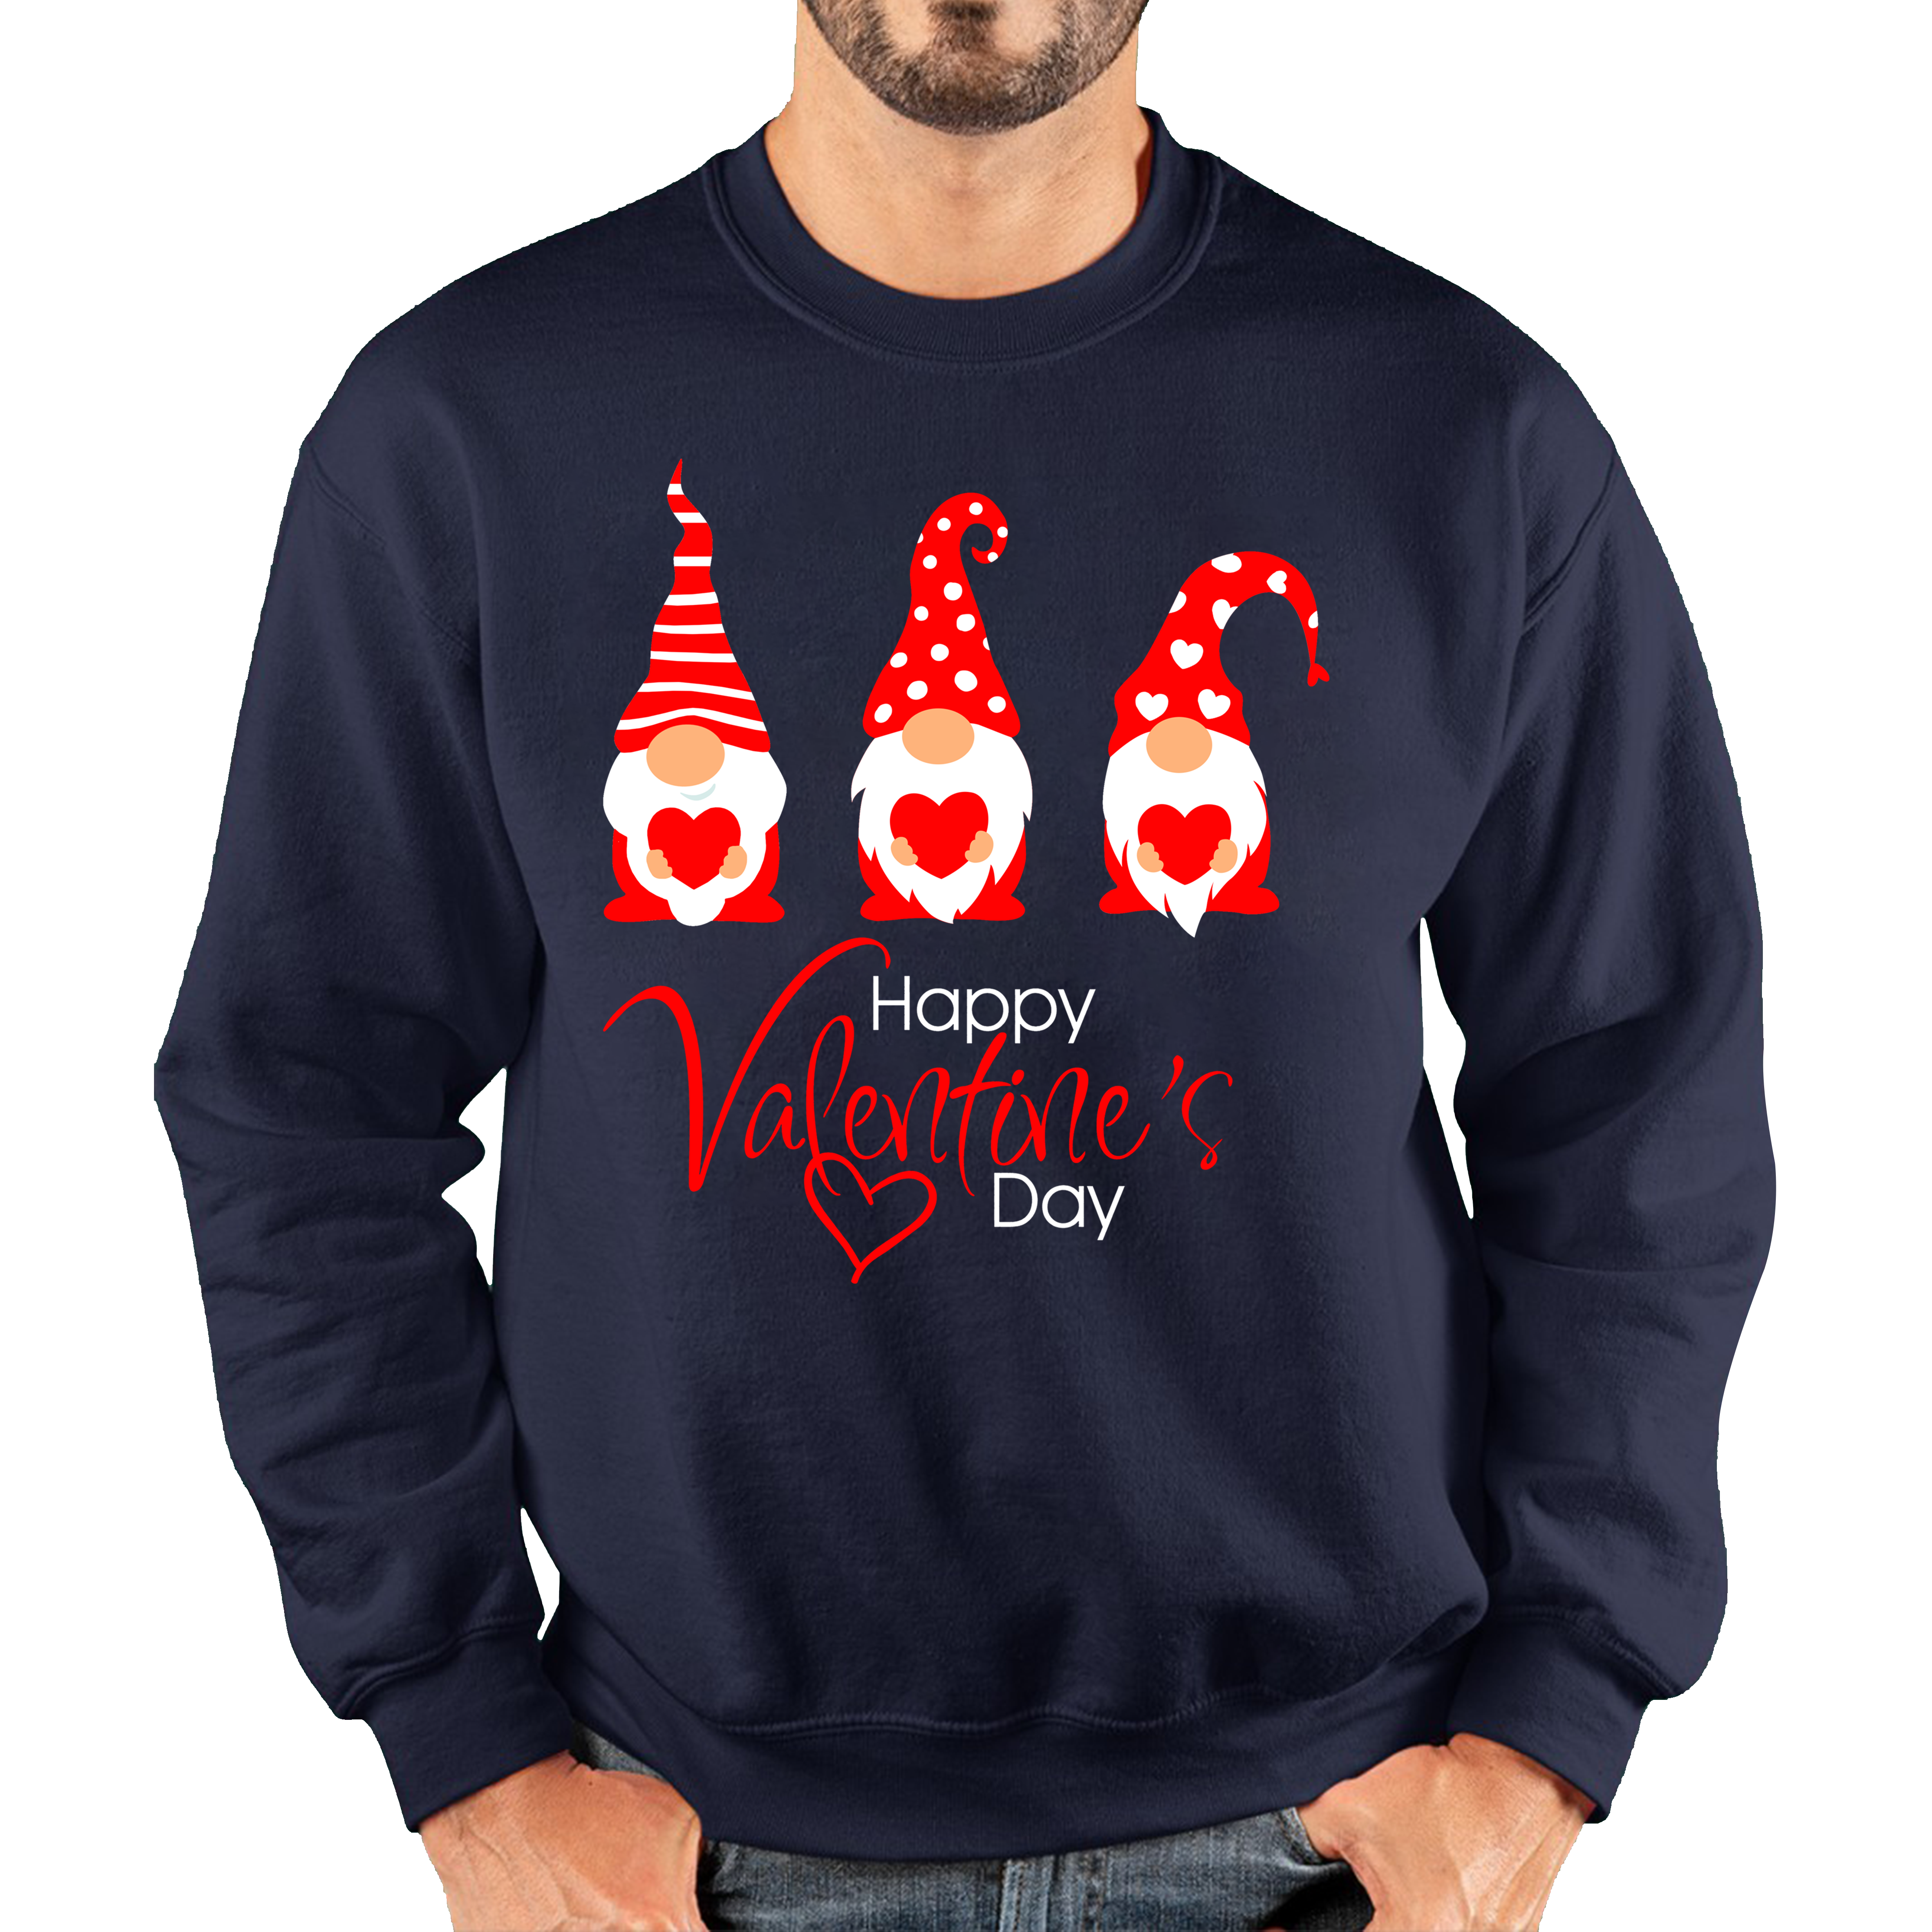 Happy Valentines Day Gnomes Jumper Top for Gnome Lovers Adult Sweatshirt